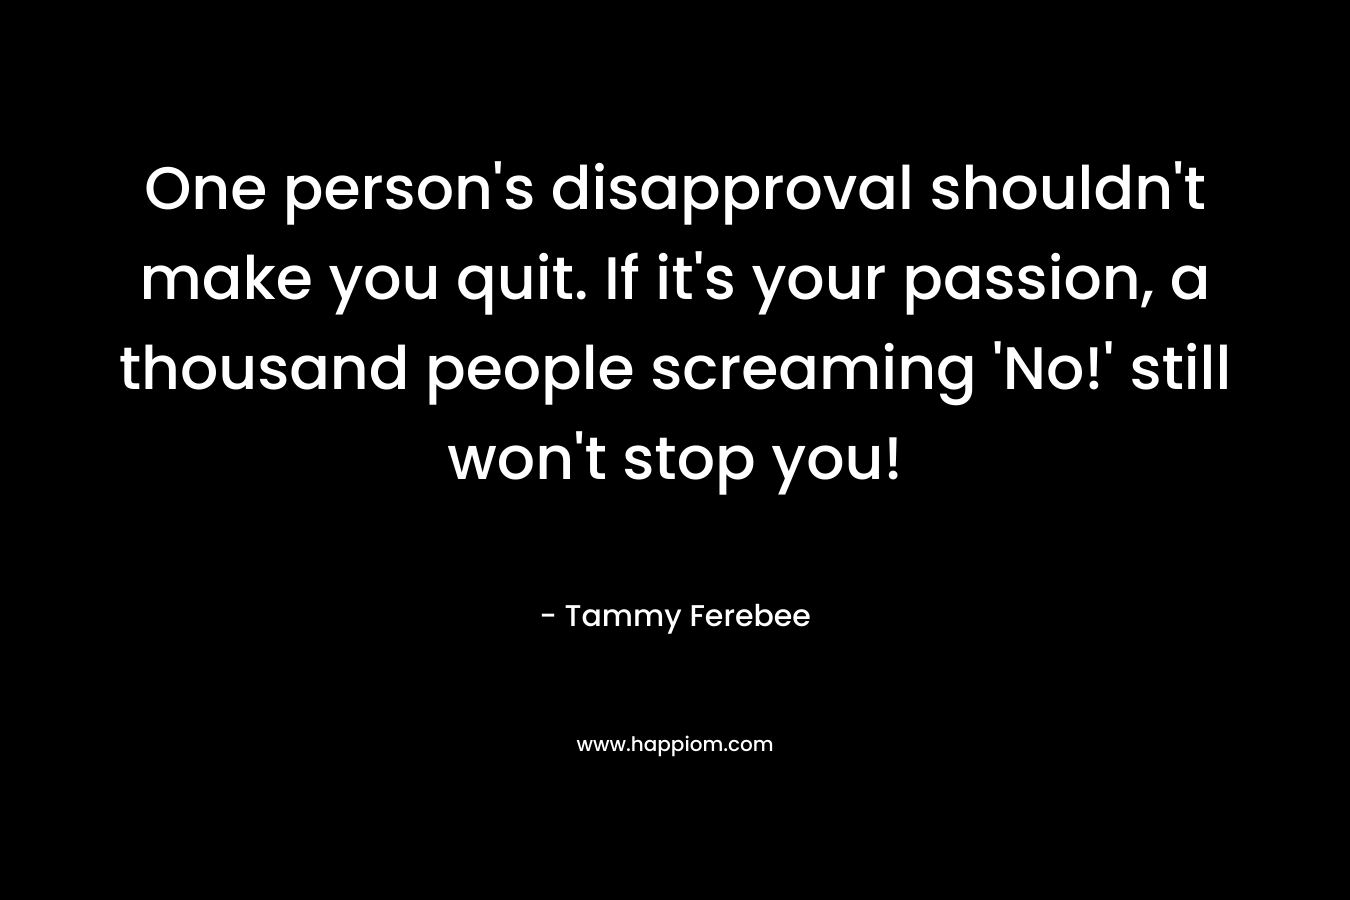 One person's disapproval shouldn't make you quit. If it's your passion, a thousand people screaming 'No!' still won't stop you!